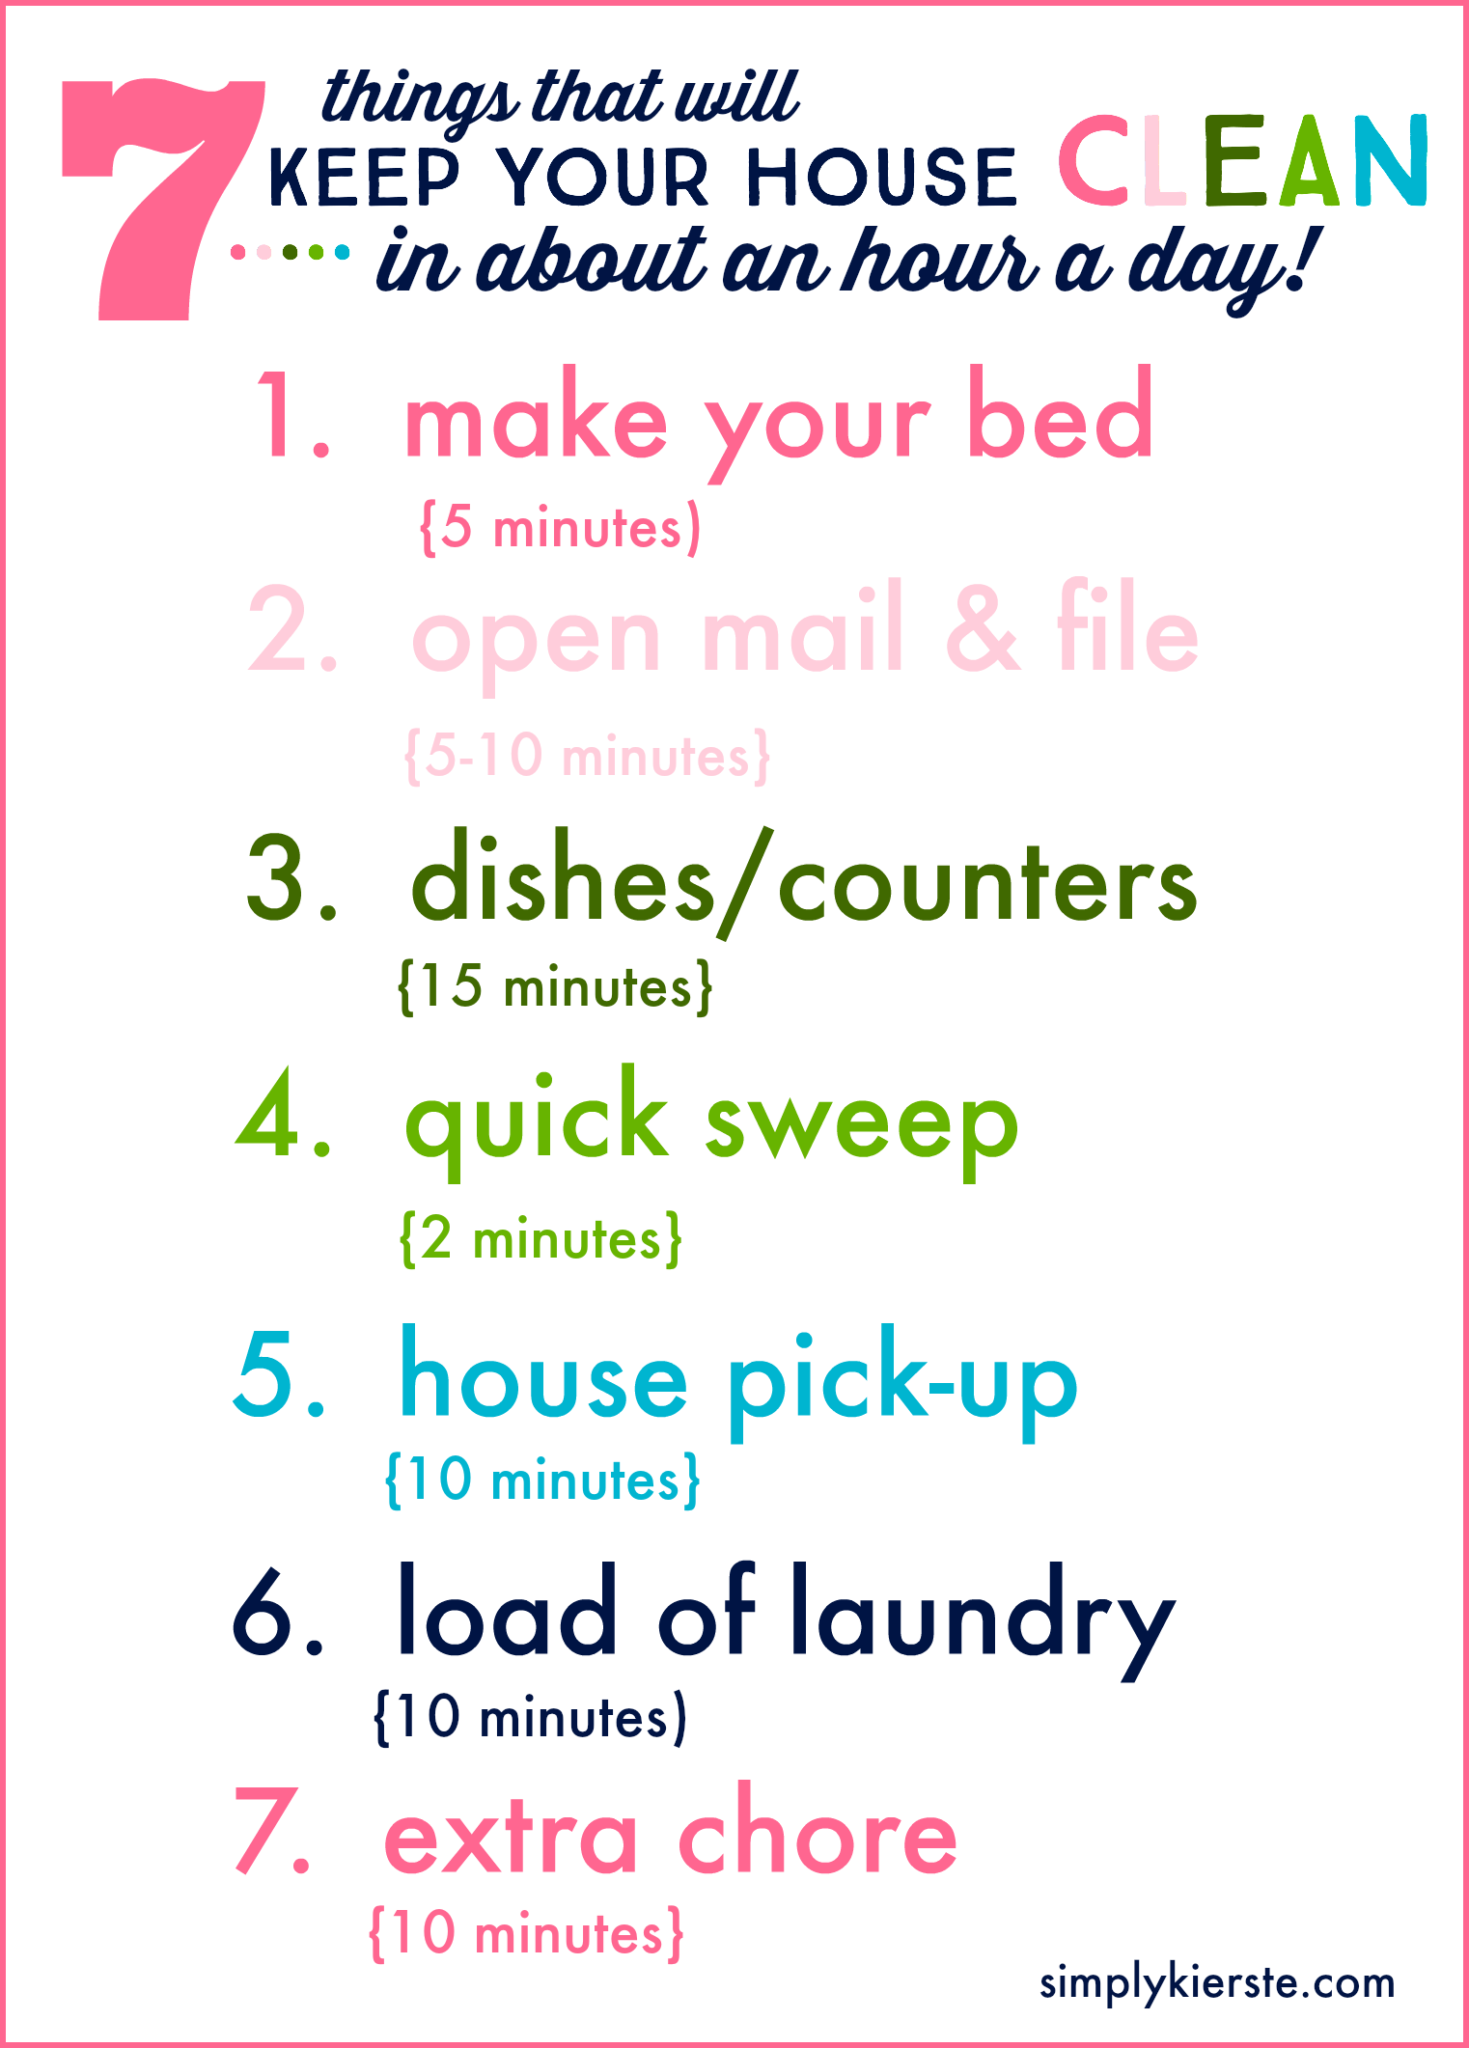 7 things that will help you keep your house clean in about an hour a day | oldsaltfarm.com